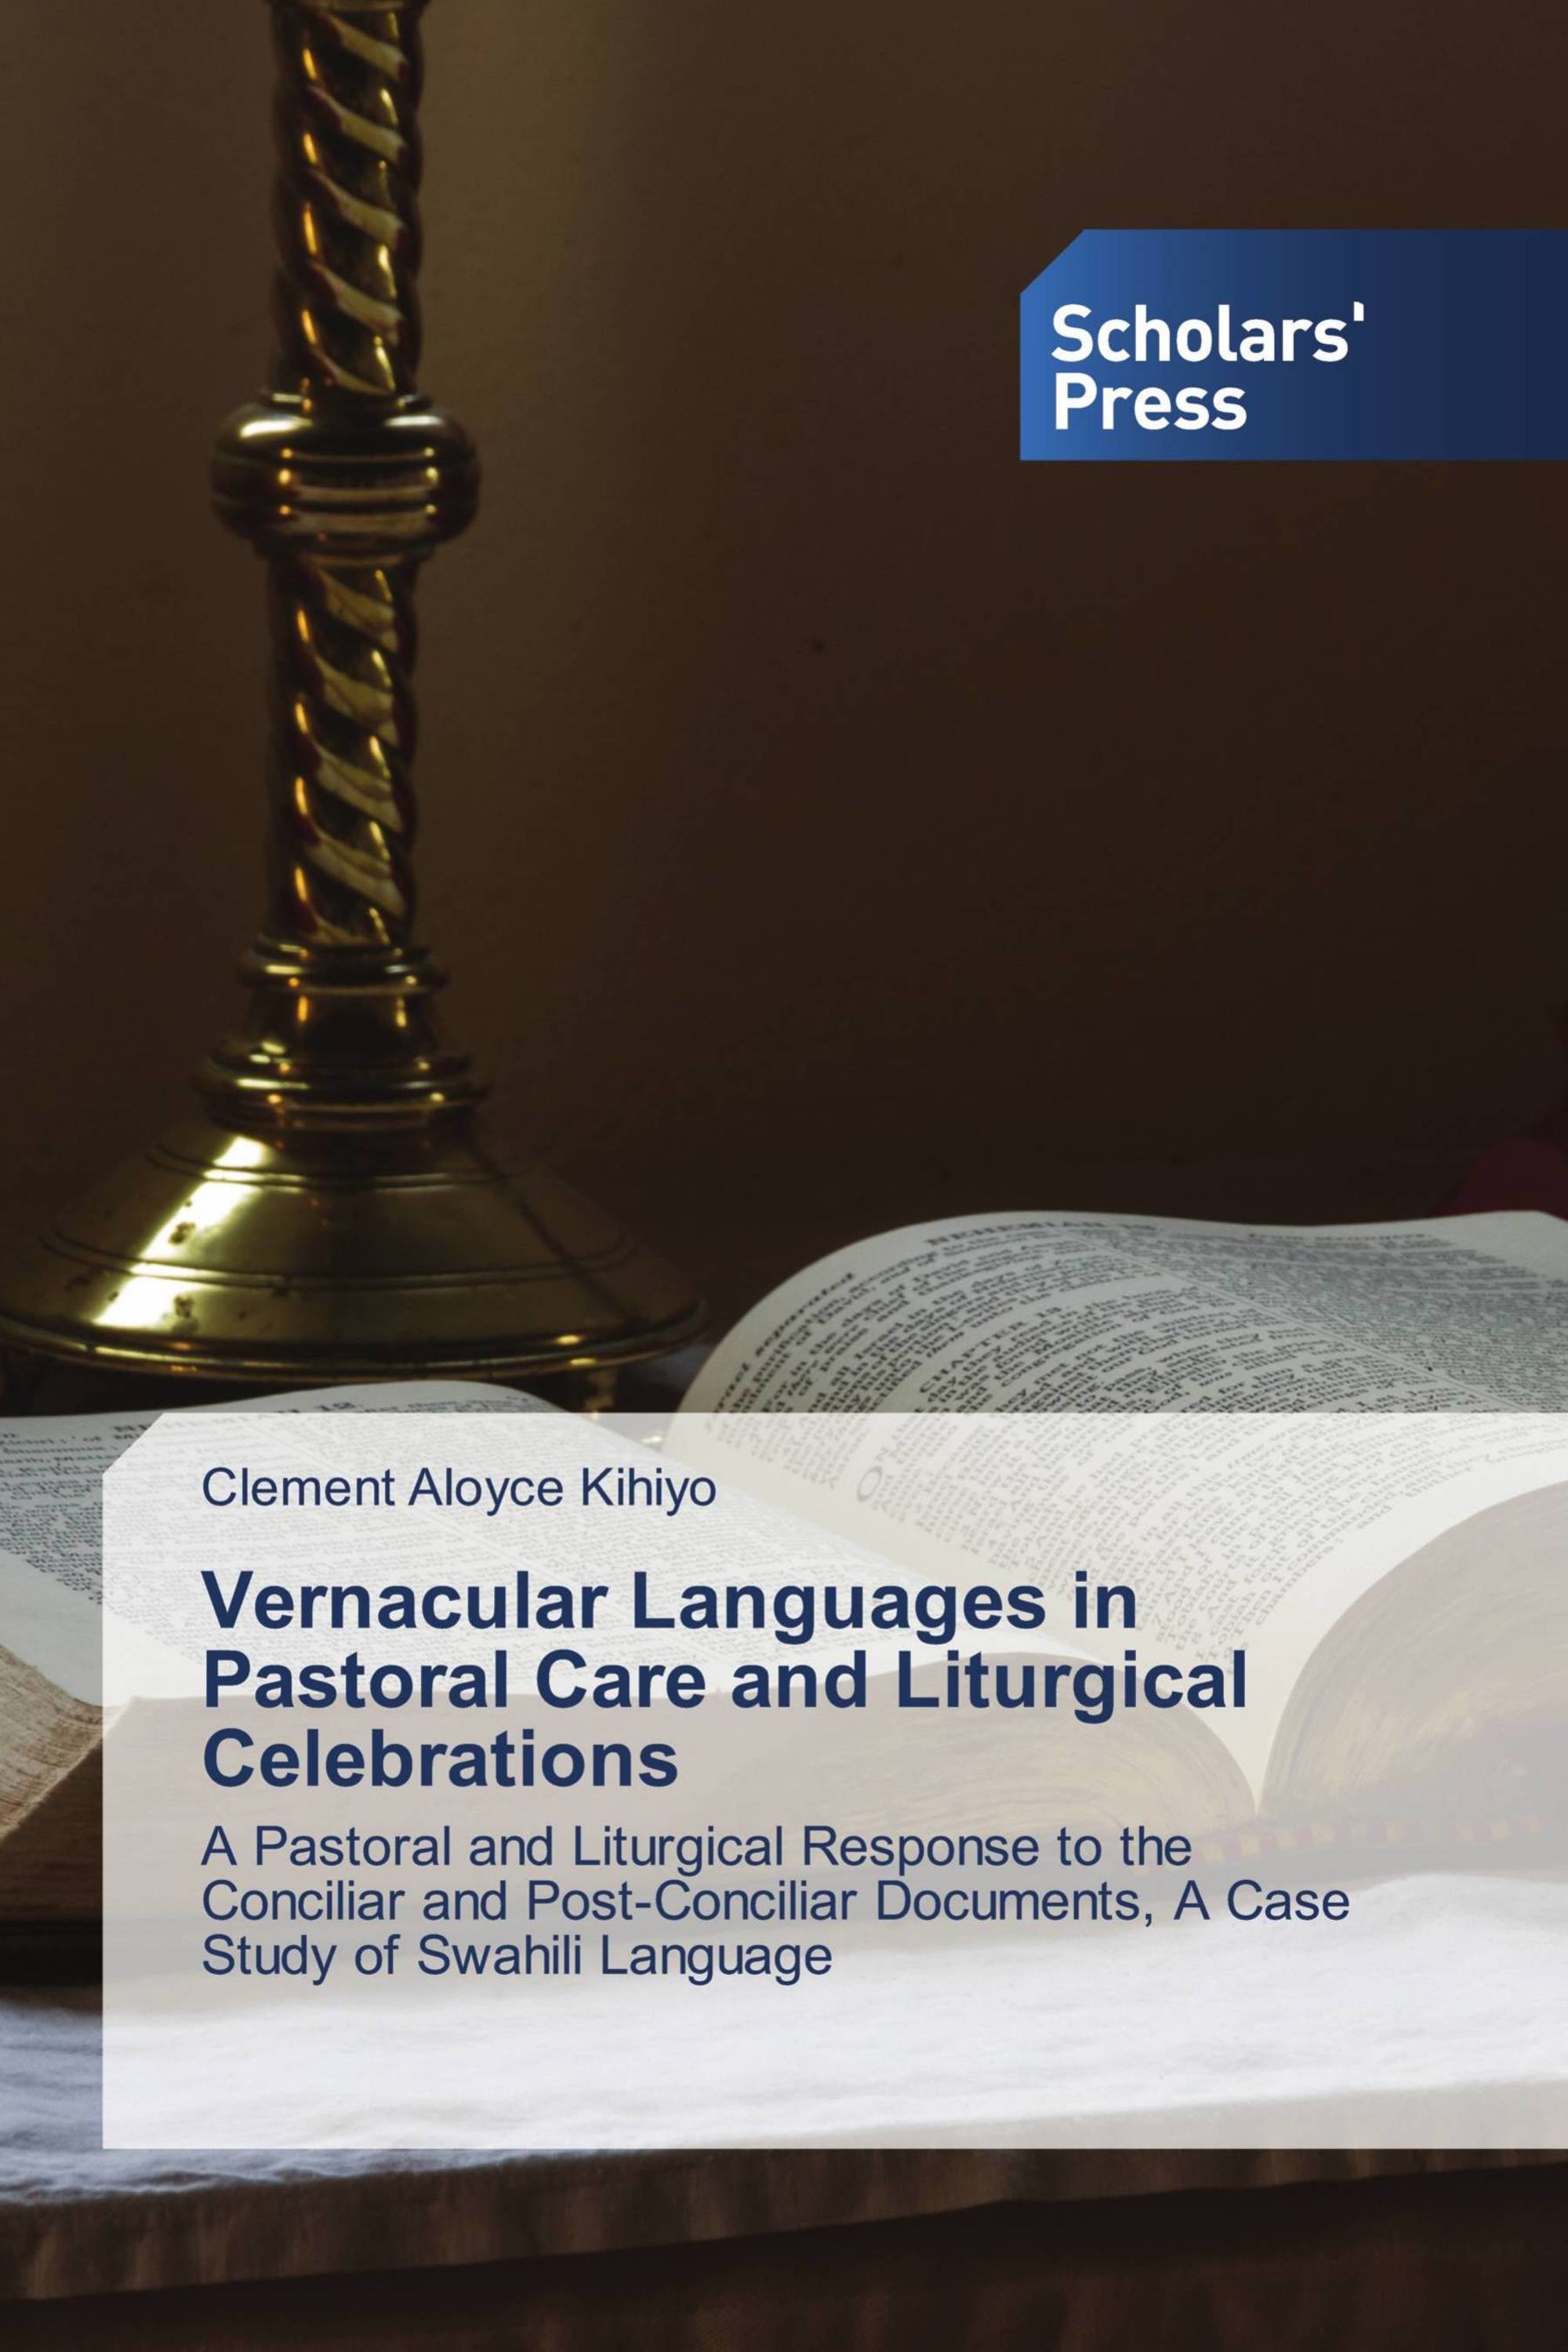 Vernacular Languages in Pastoral Care and Liturgical Celebrations